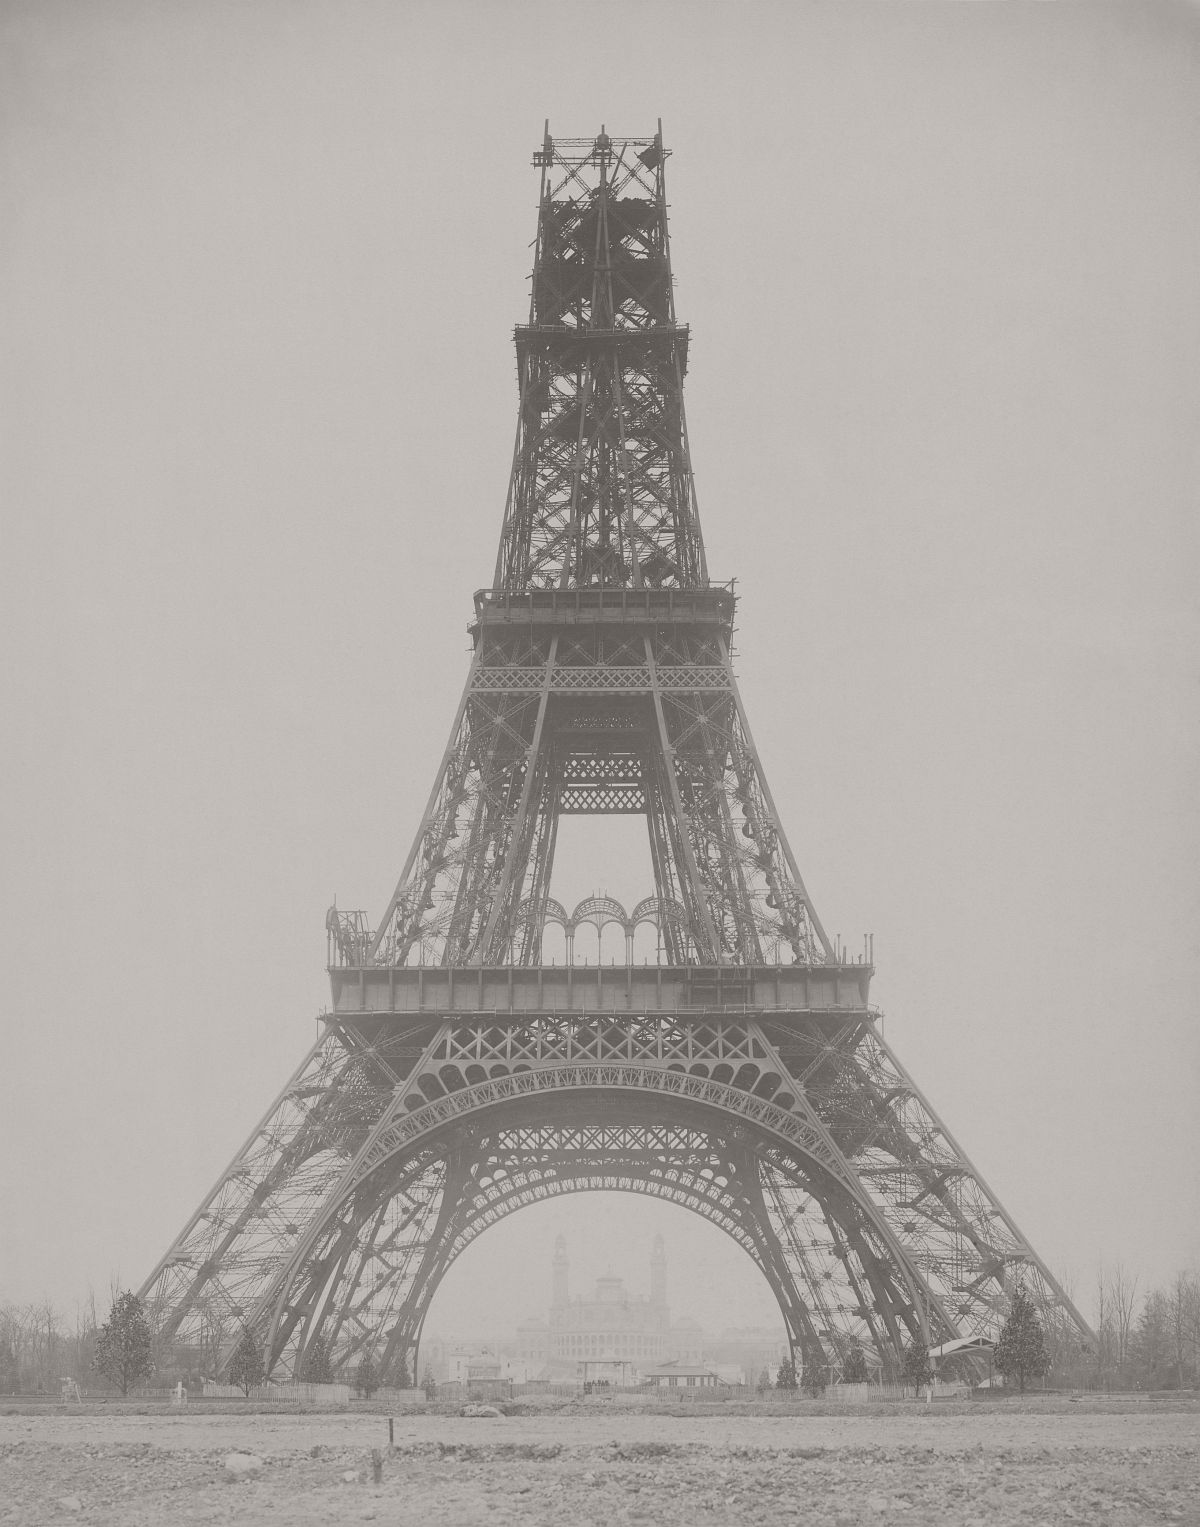 The Eiffel Tower: State of the Construction, Paris, France, November 23, 1888.